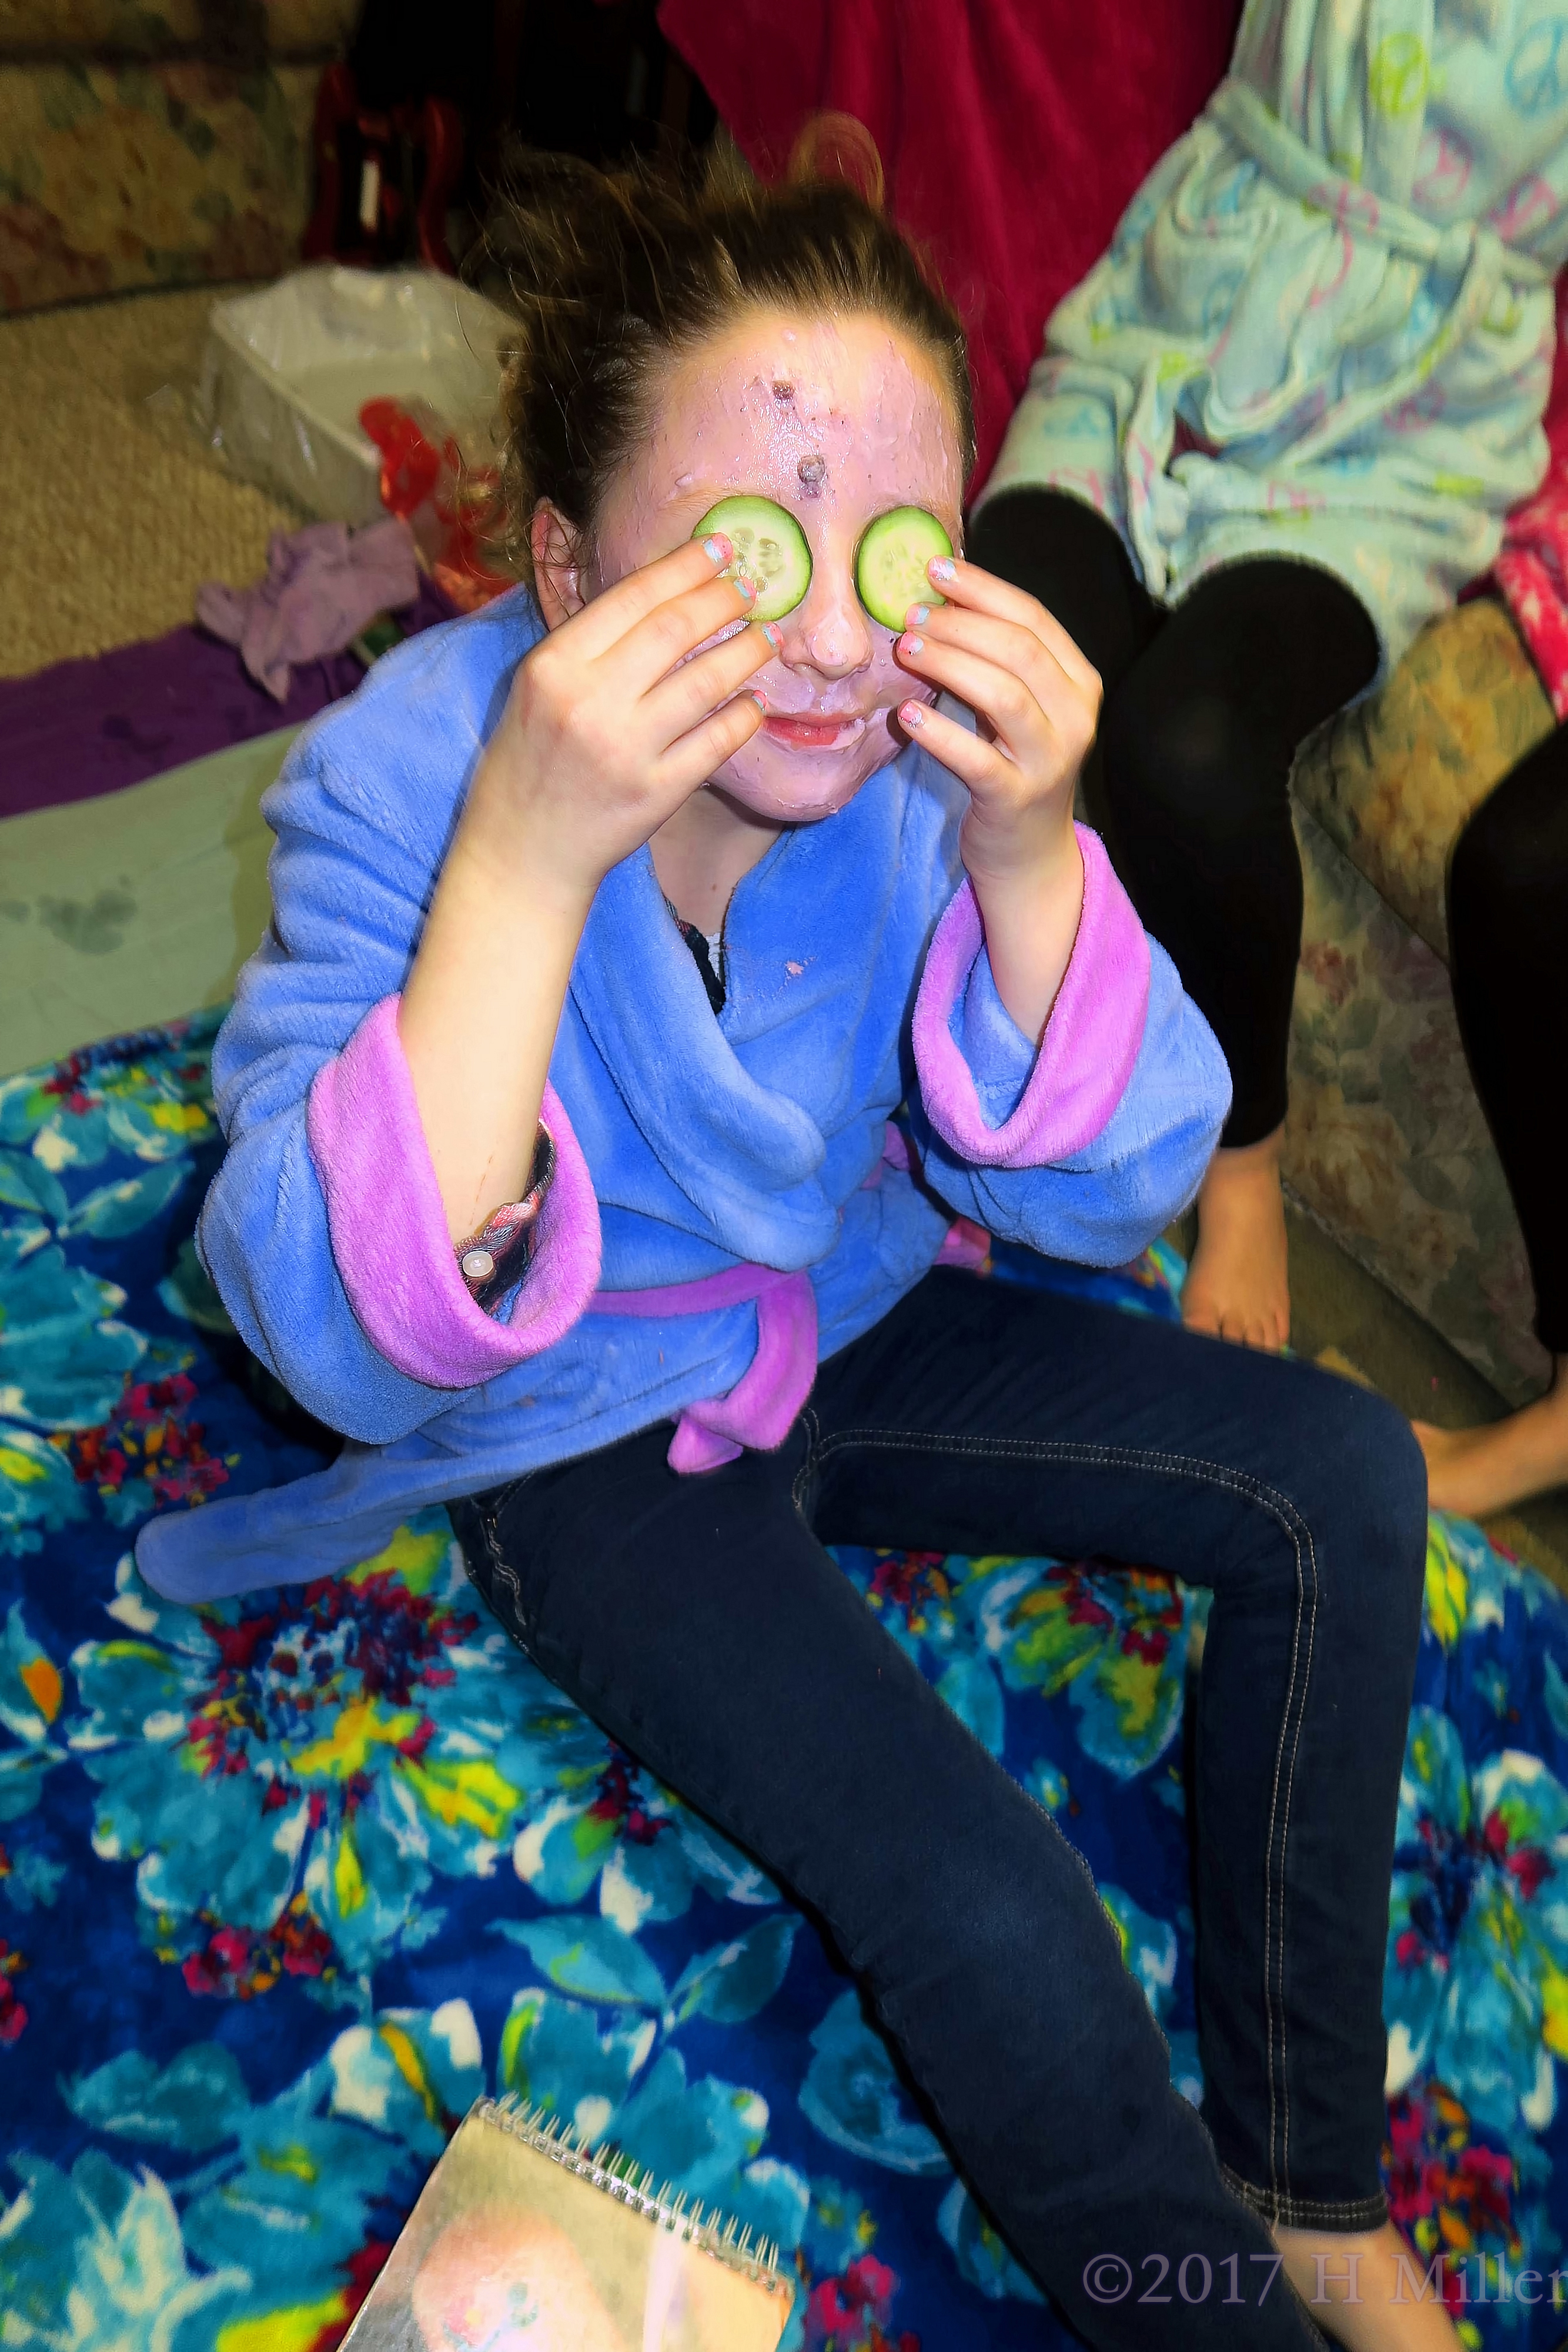 Putting Her Cukes Back On Her Eyes During Her Facial. 4